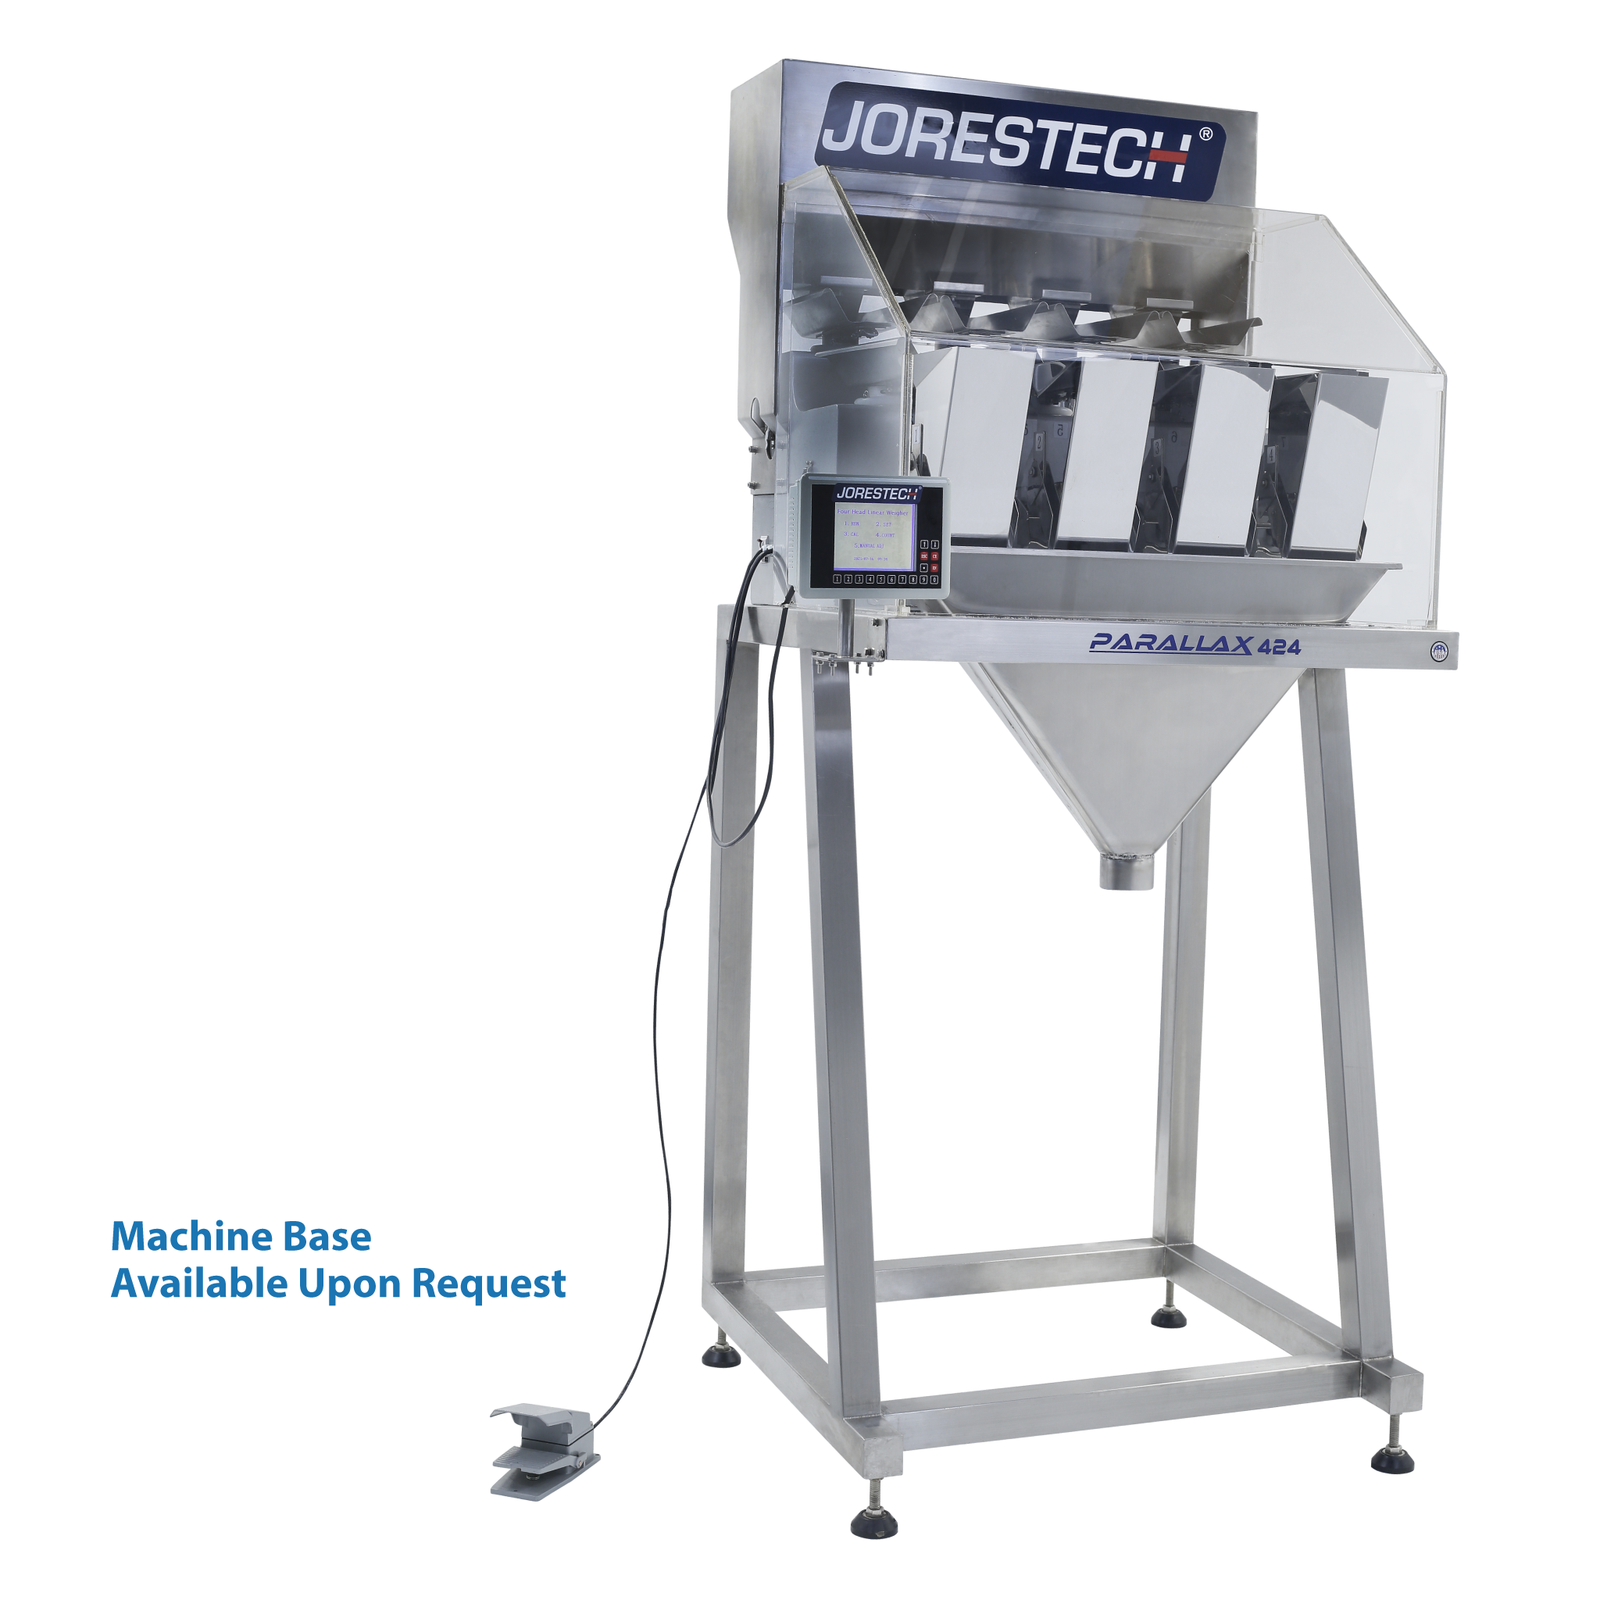 The JORES TECHNOLOGIES® stainless steel 4-head linear weigher shown in a frontal view placed in its stand which can be sold upon request